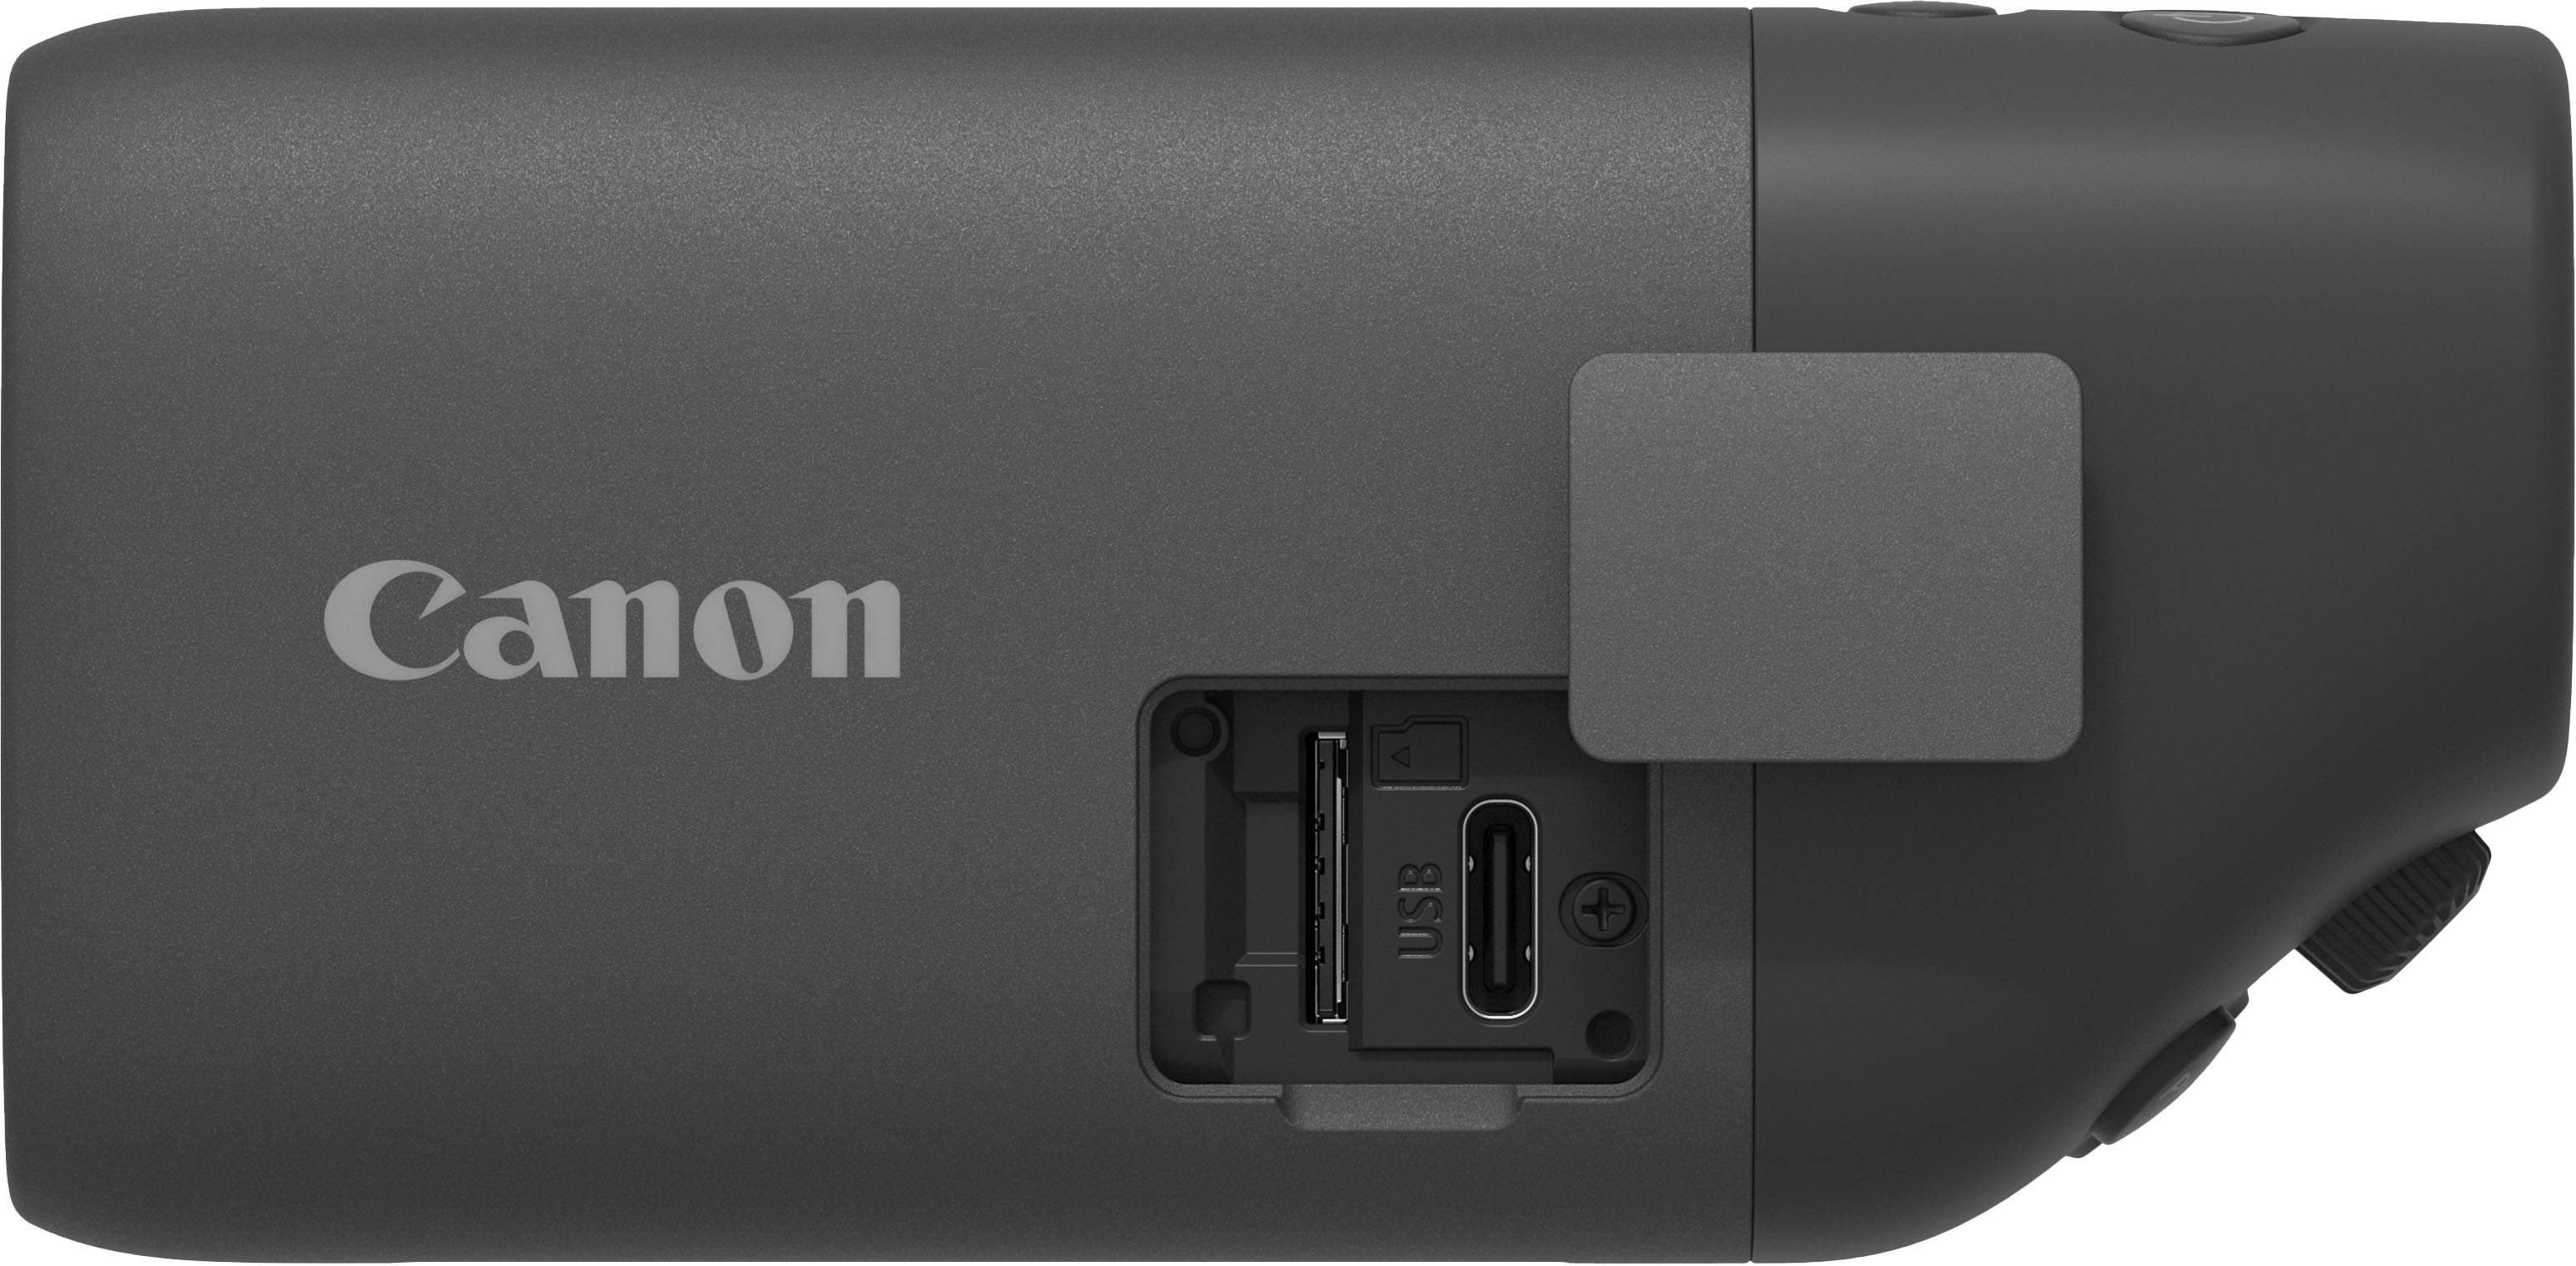 Angle View: Canon - 250 Ink Cartridge - Black